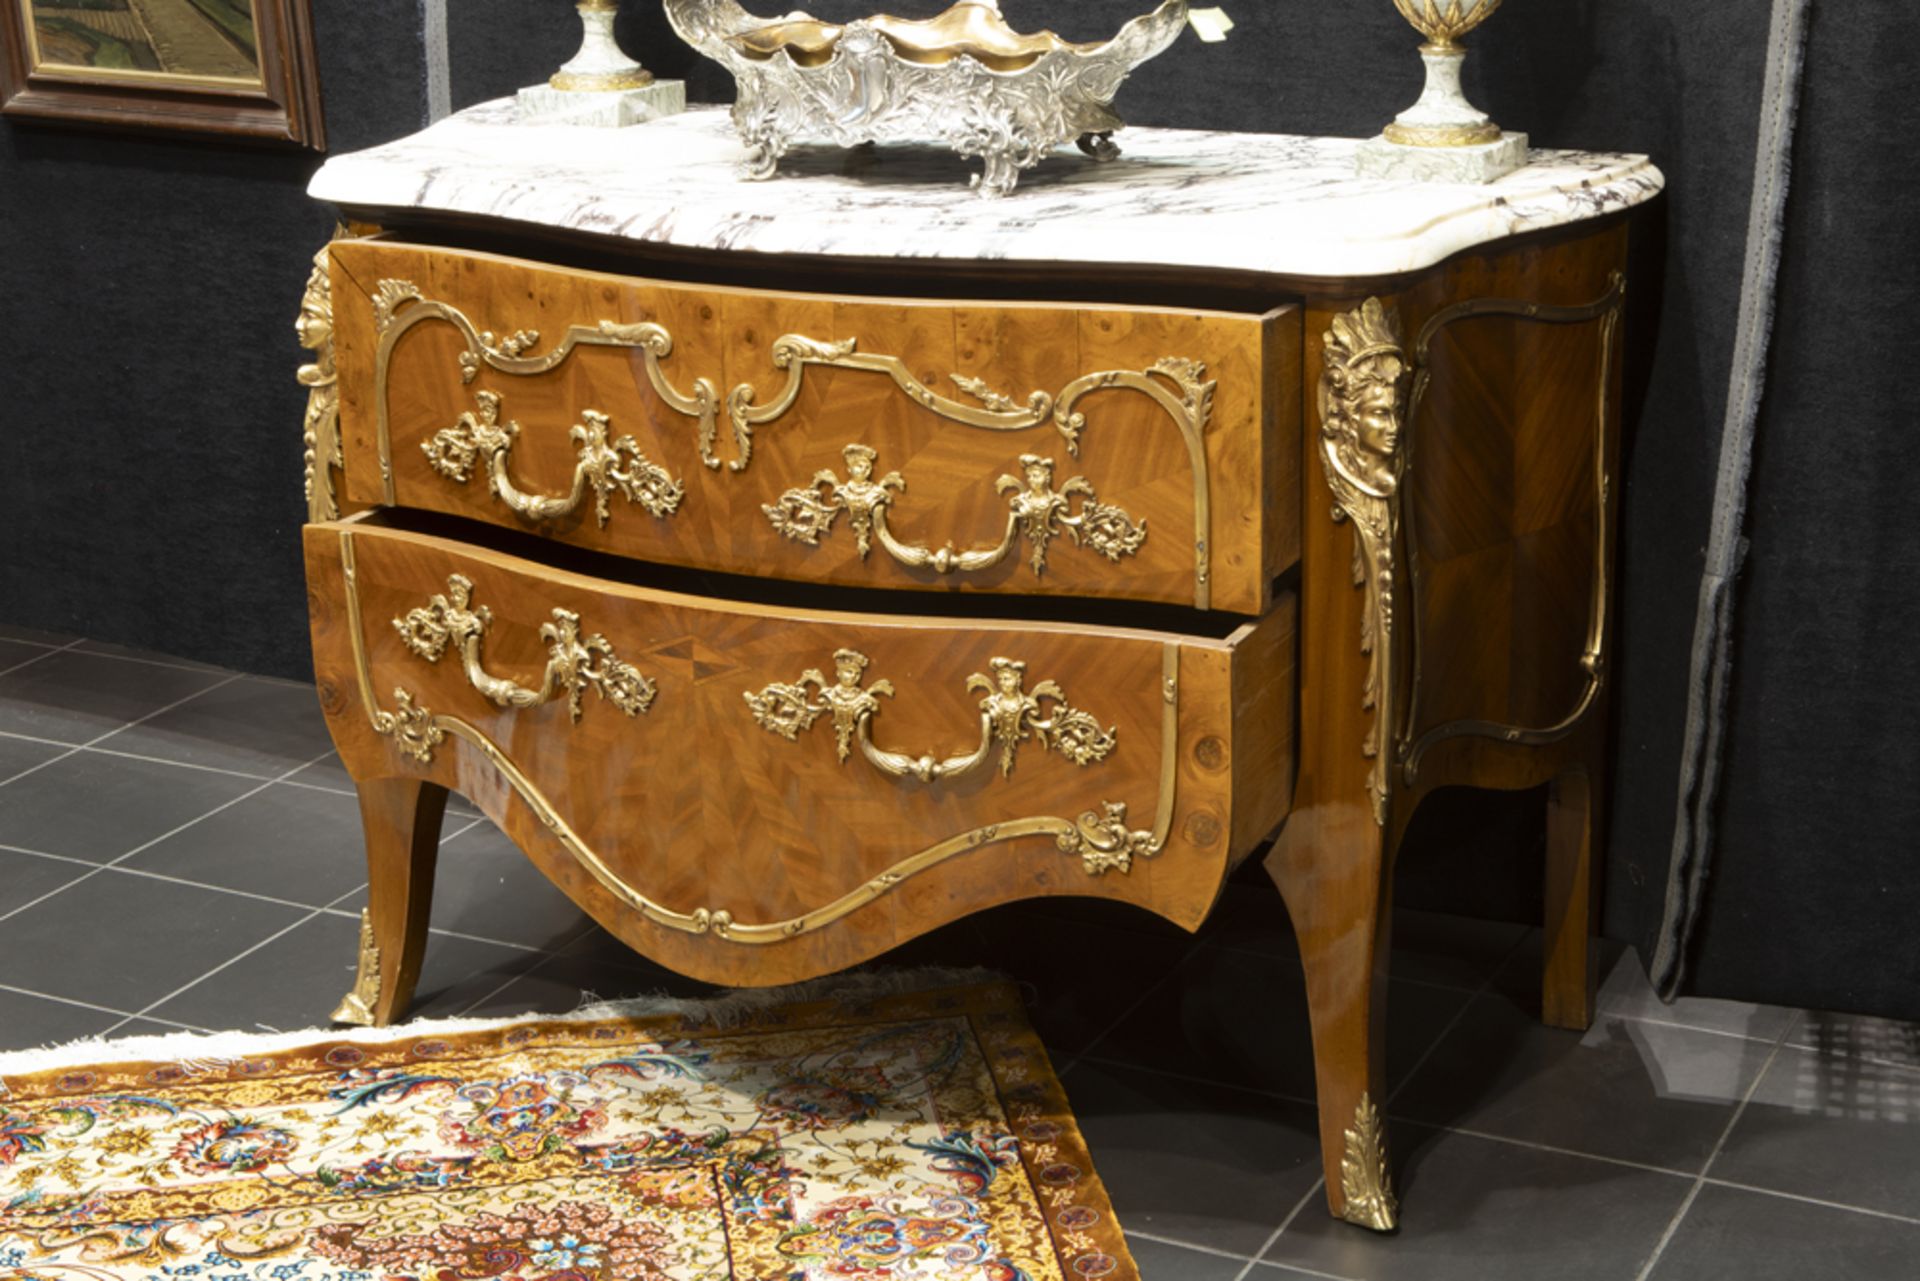 Louis XV style chest of drawers in burr of walnut with mountings in gilded bronze and with a quite - Image 2 of 2